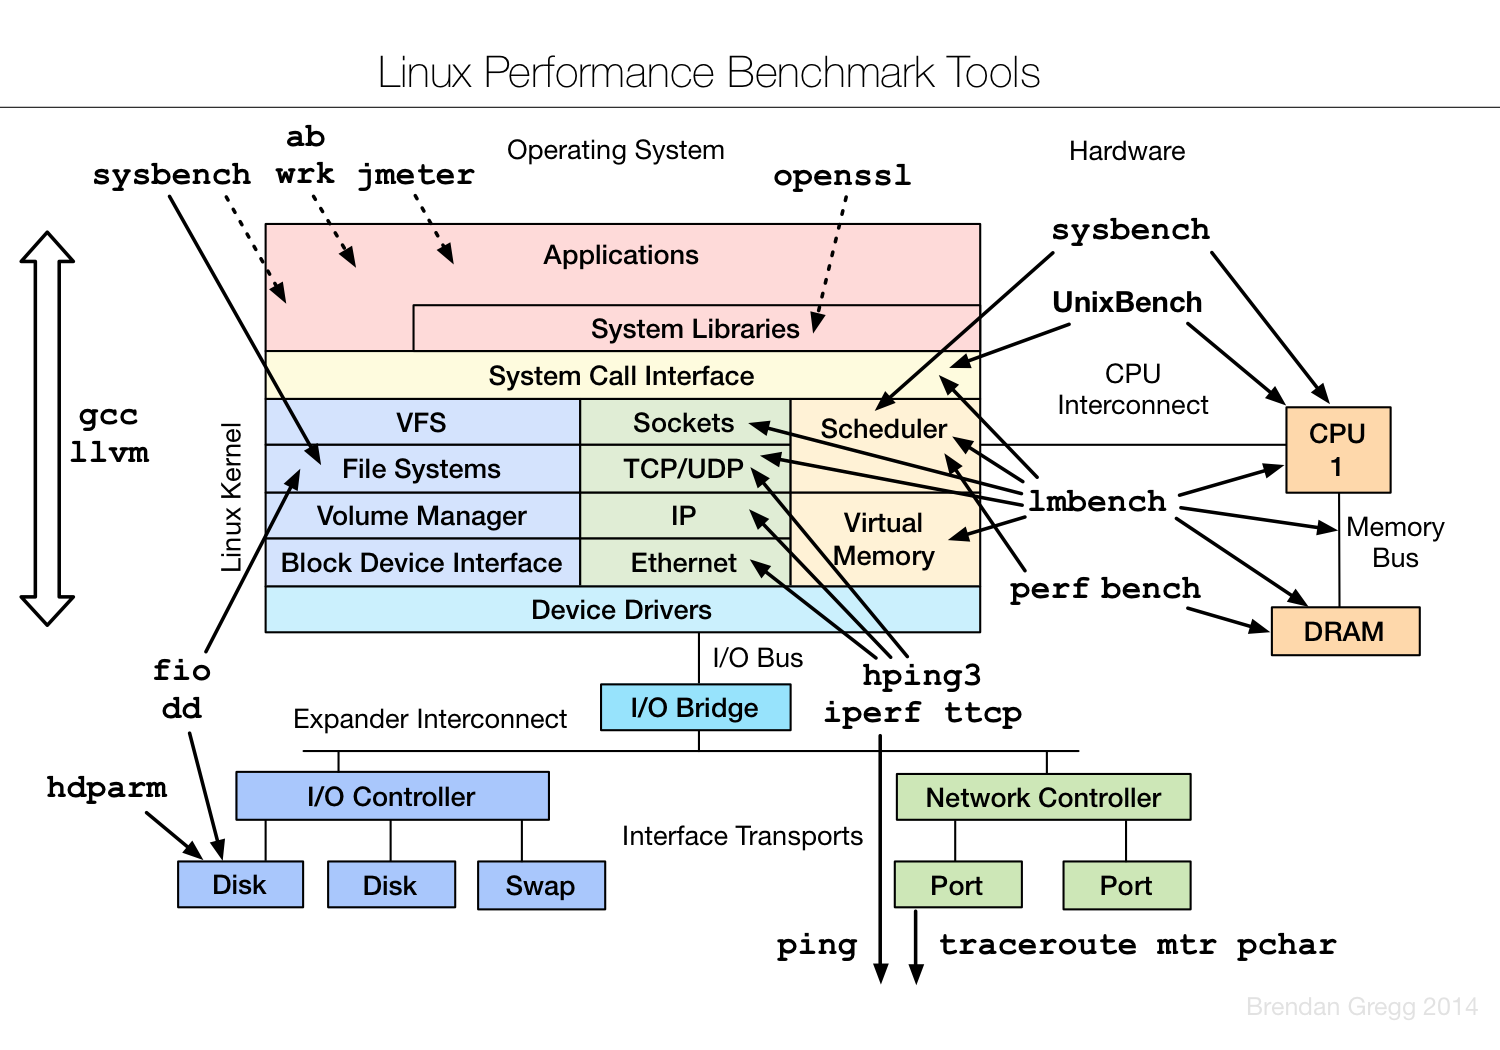 Linux benchmarking tools